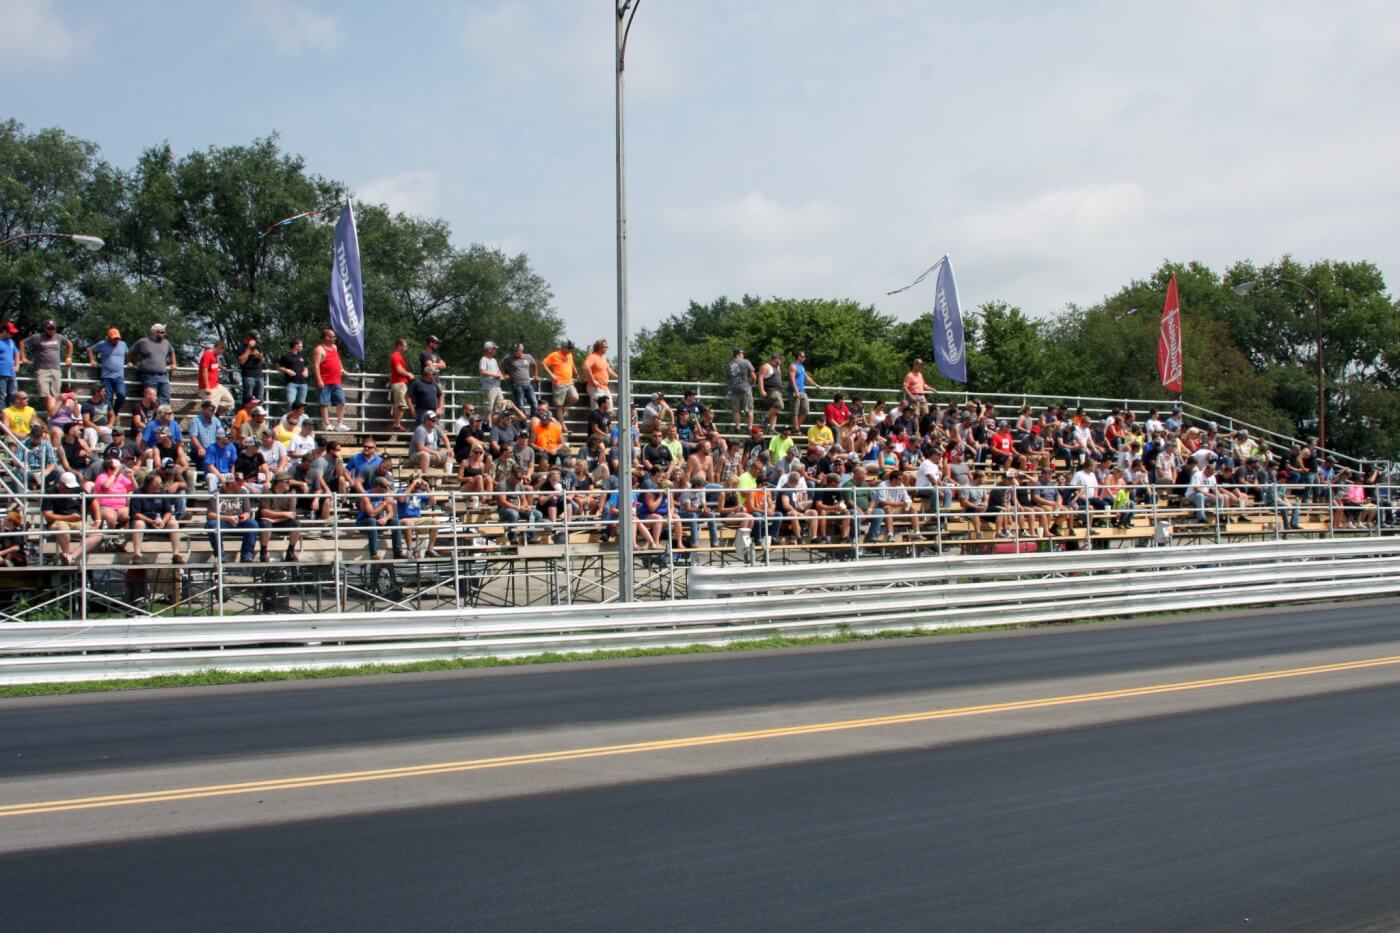 Even with the hot temperatures and no covering for the grandstands at the Crossroads Dragway, diesel enthusiasts filled the seats to catch the diesel drag racing action.